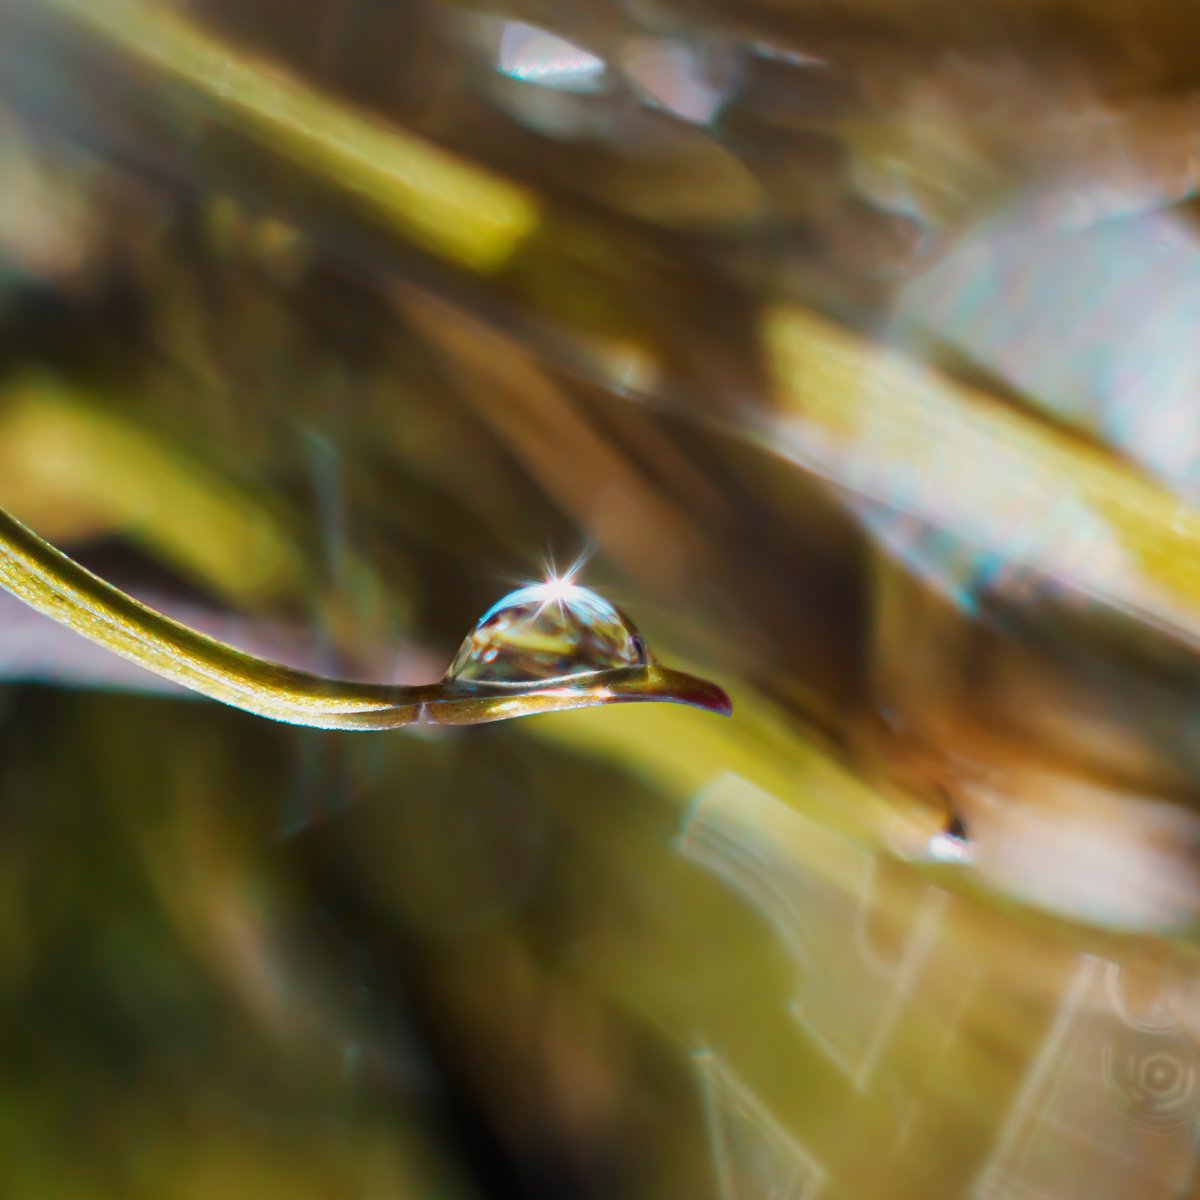 FLIGHT IN THE RAIN - LIMITED EDITION PRINT OF MACRO PHOTOGRAPHY OF A DEW DROP ON A GRASSBL... by Inna Etuvgi